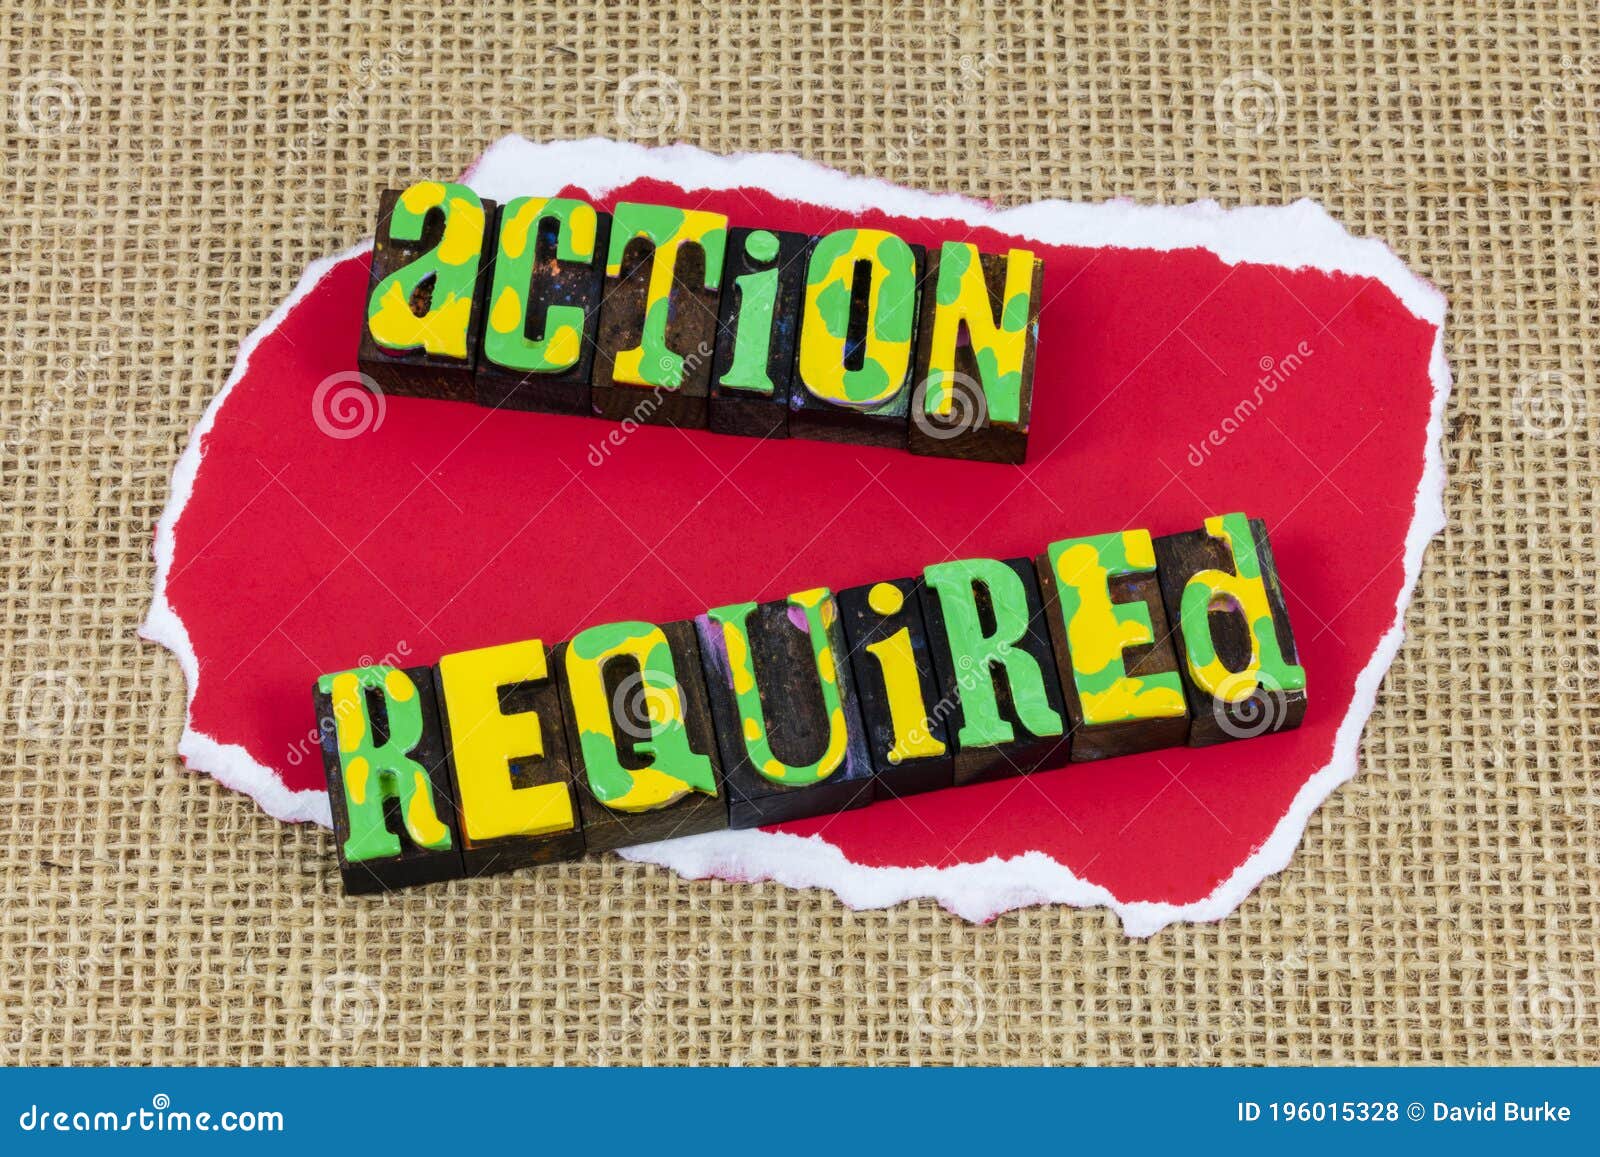 action required important message immediate attention necessary urgent reminder